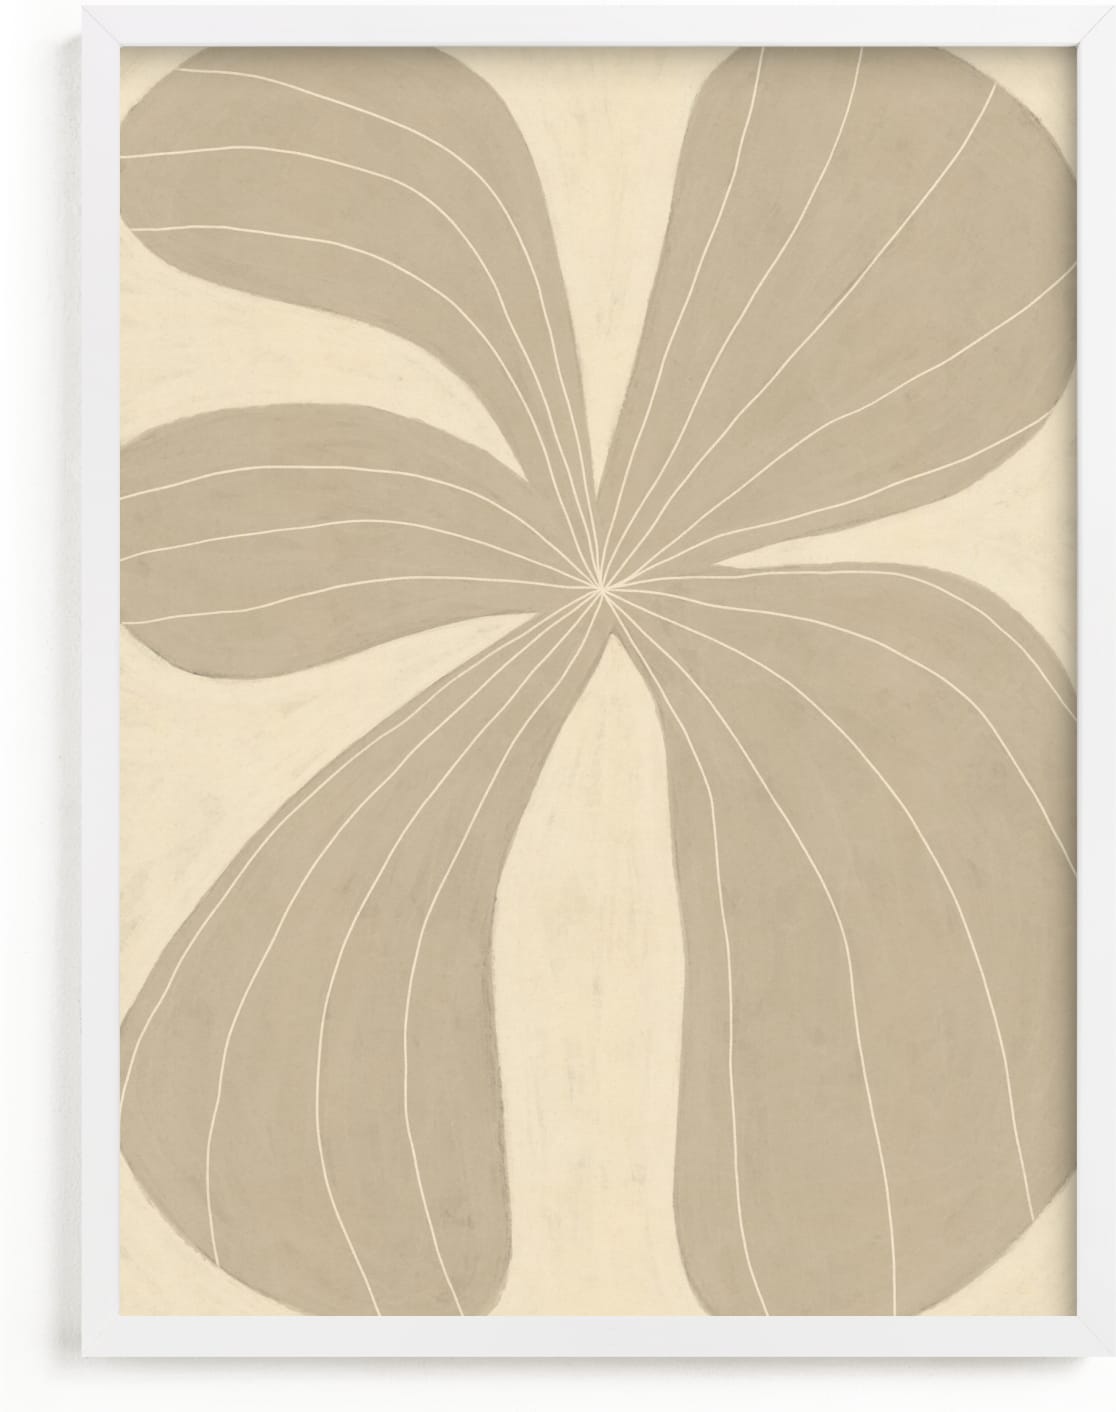 This is a brown art by Alisa Galitsyna called Beige Flower.